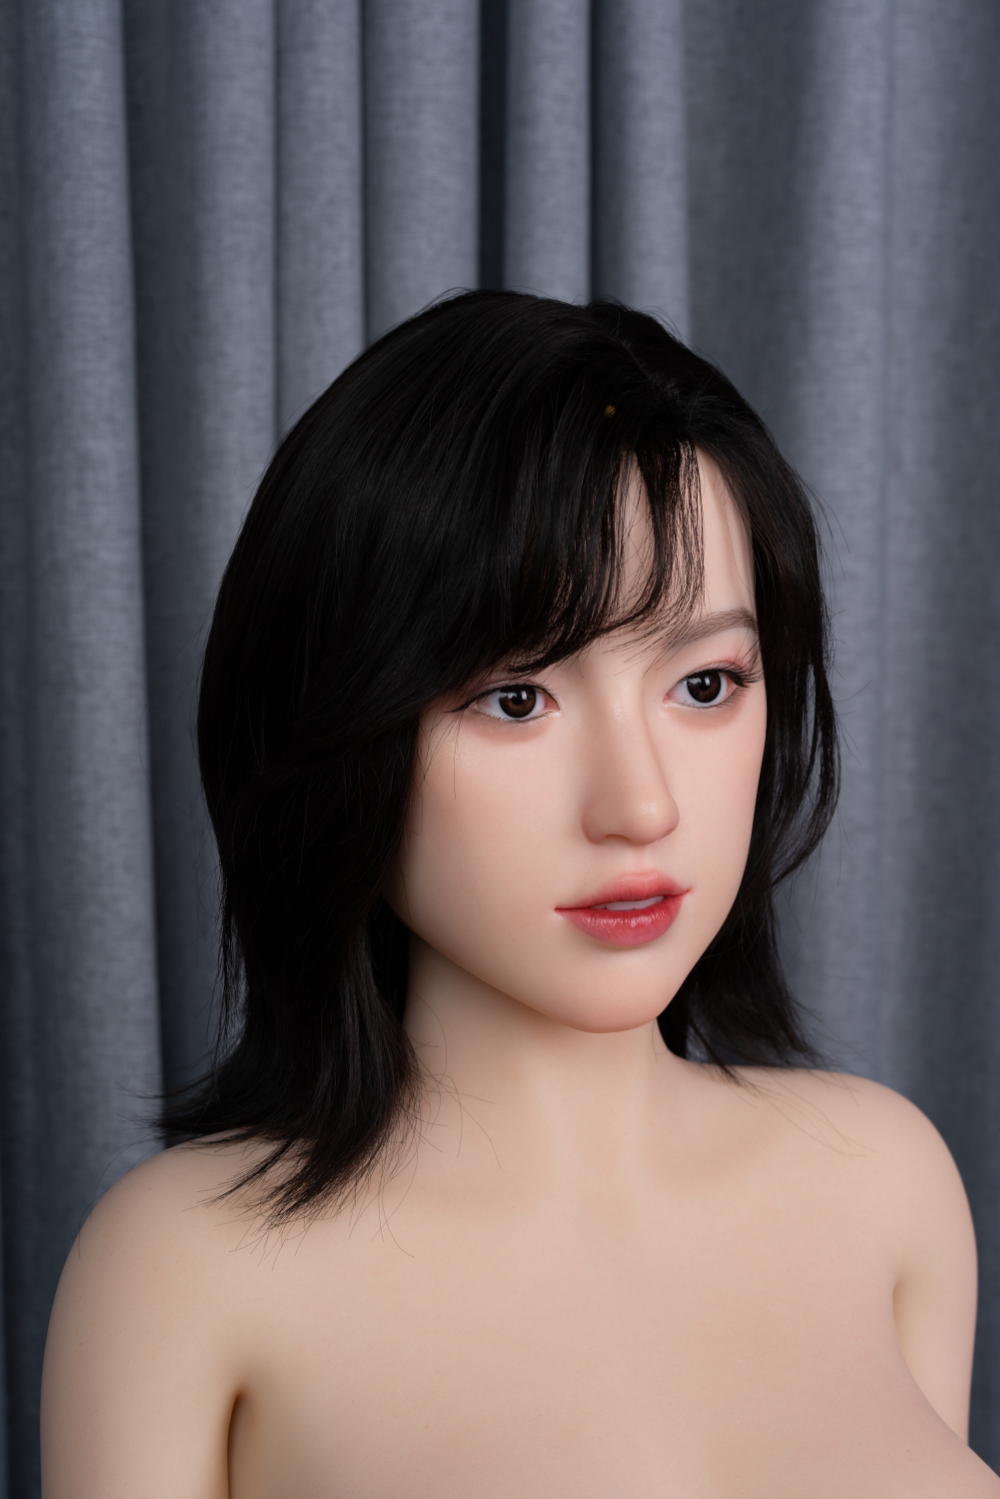 Zelex Doll 165 cm F Fusion - Fumiko | Buy Sex Dolls at DOLLS ACTUALLY